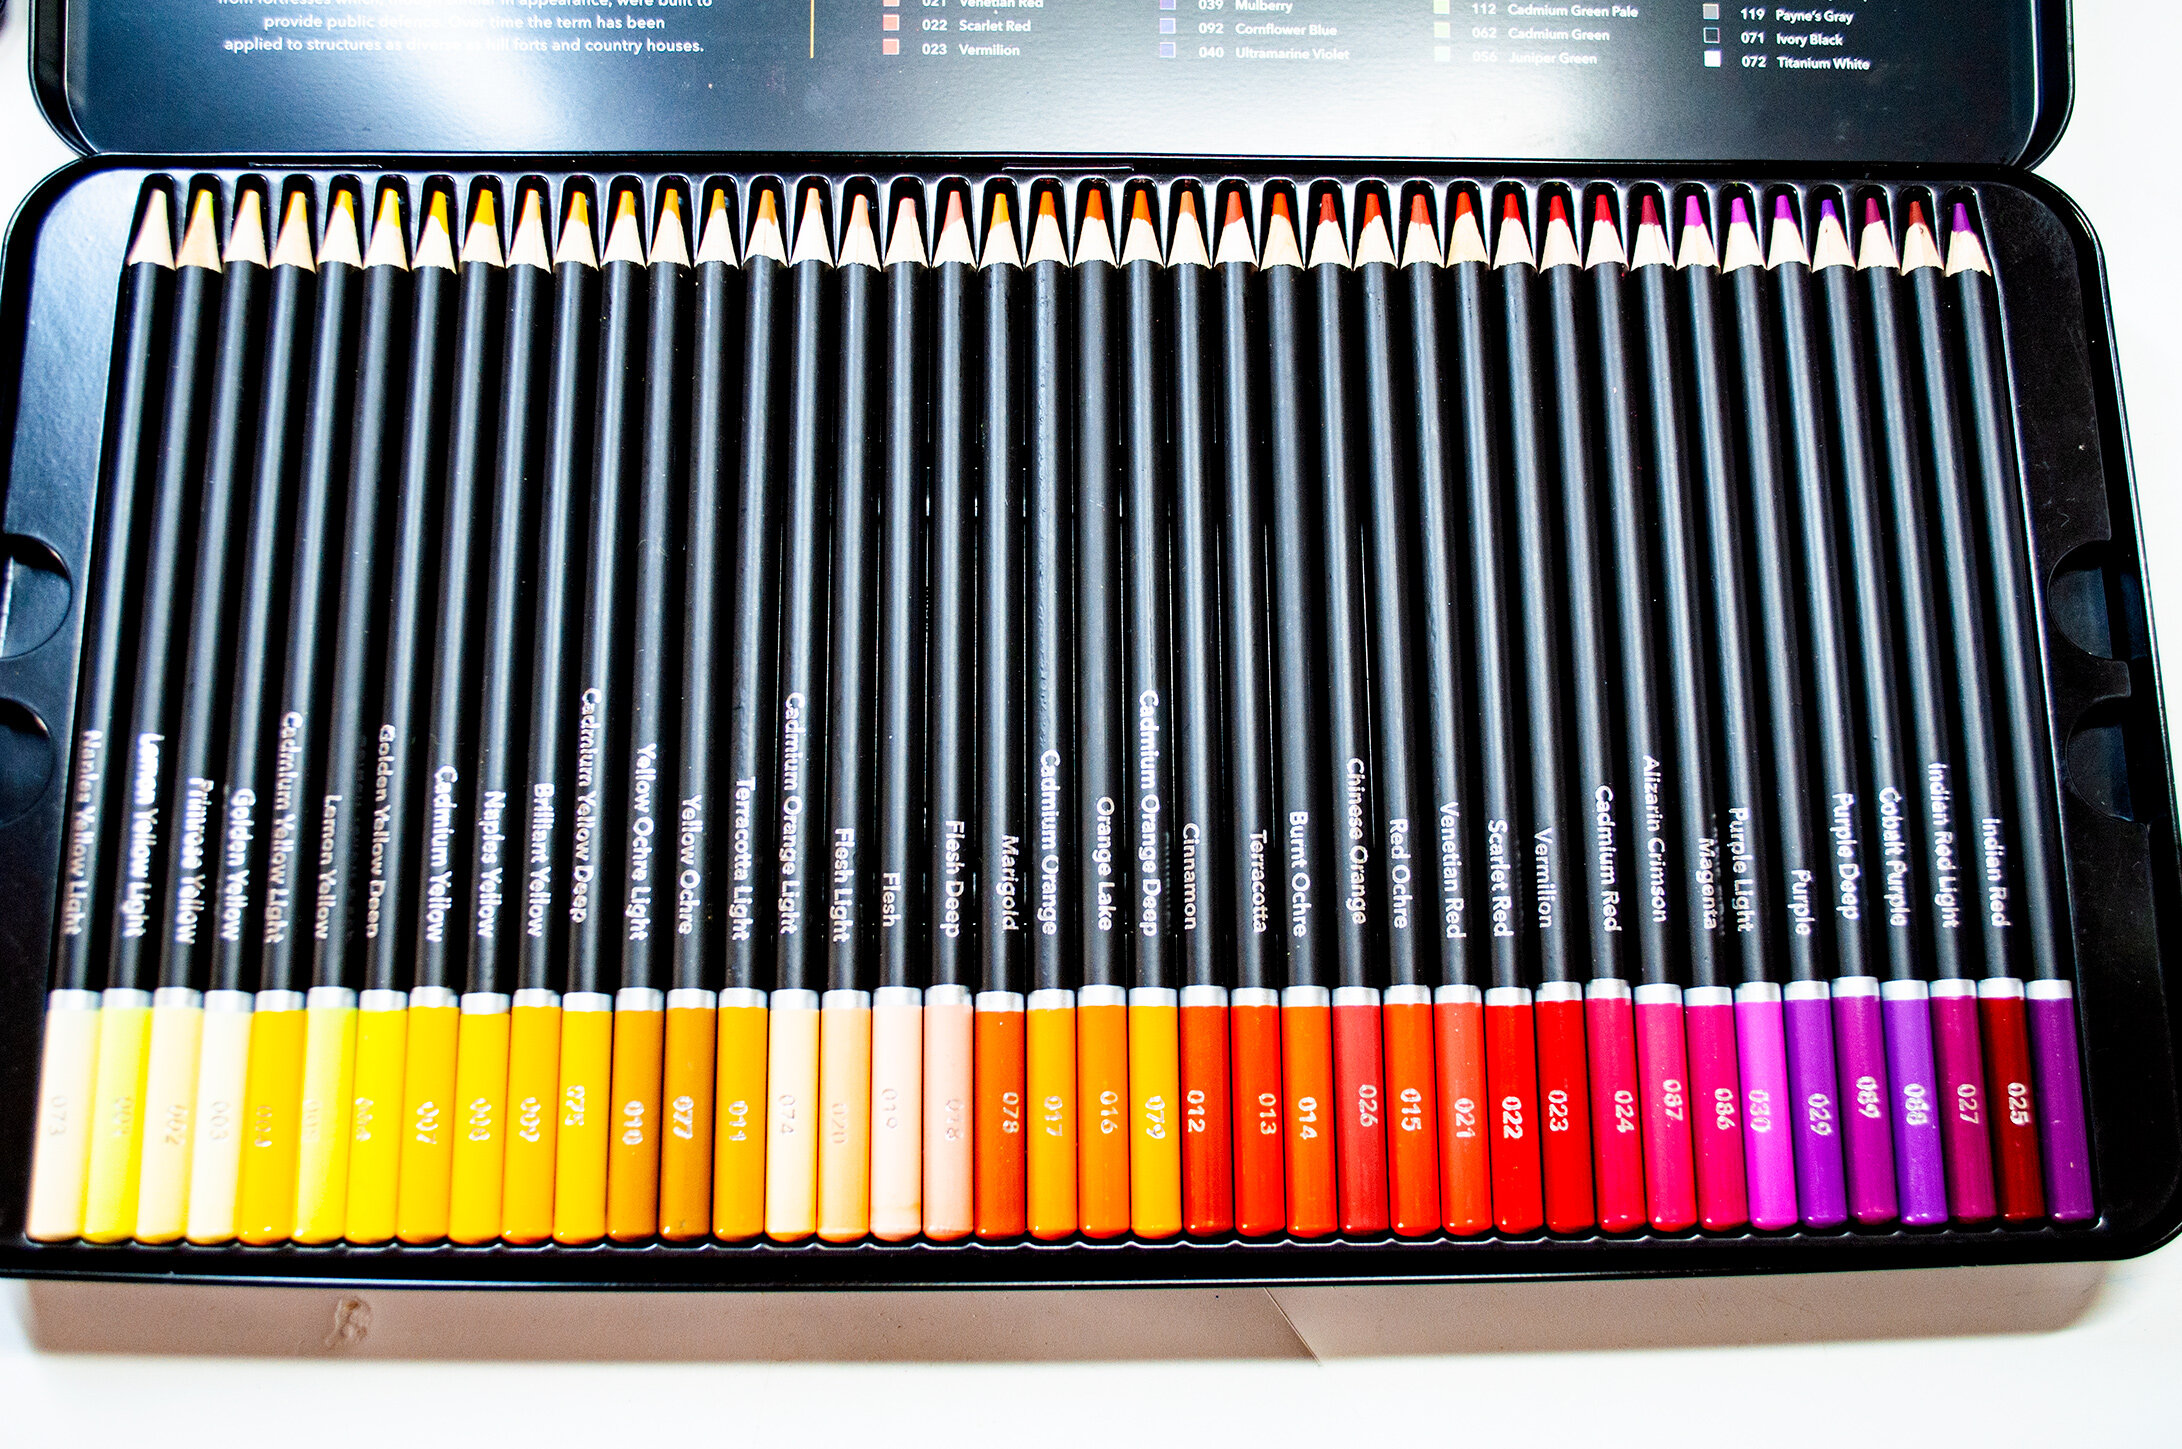 Castle Art Supply Colored Pencil 72 Set Color Charts and Color